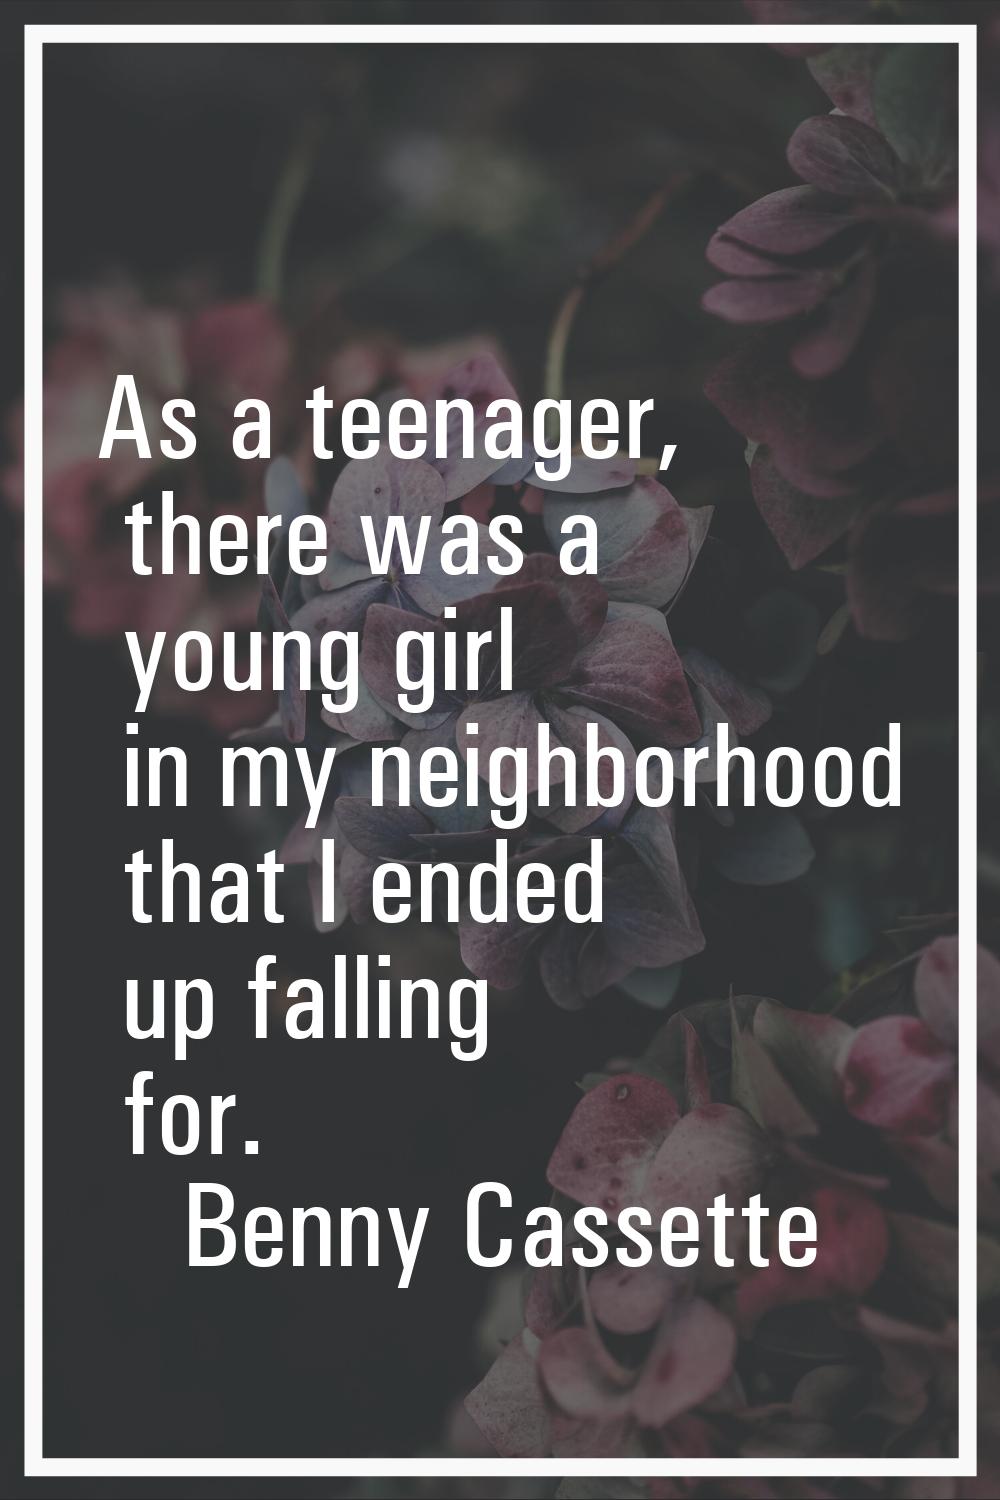 As a teenager, there was a young girl in my neighborhood that I ended up falling for.